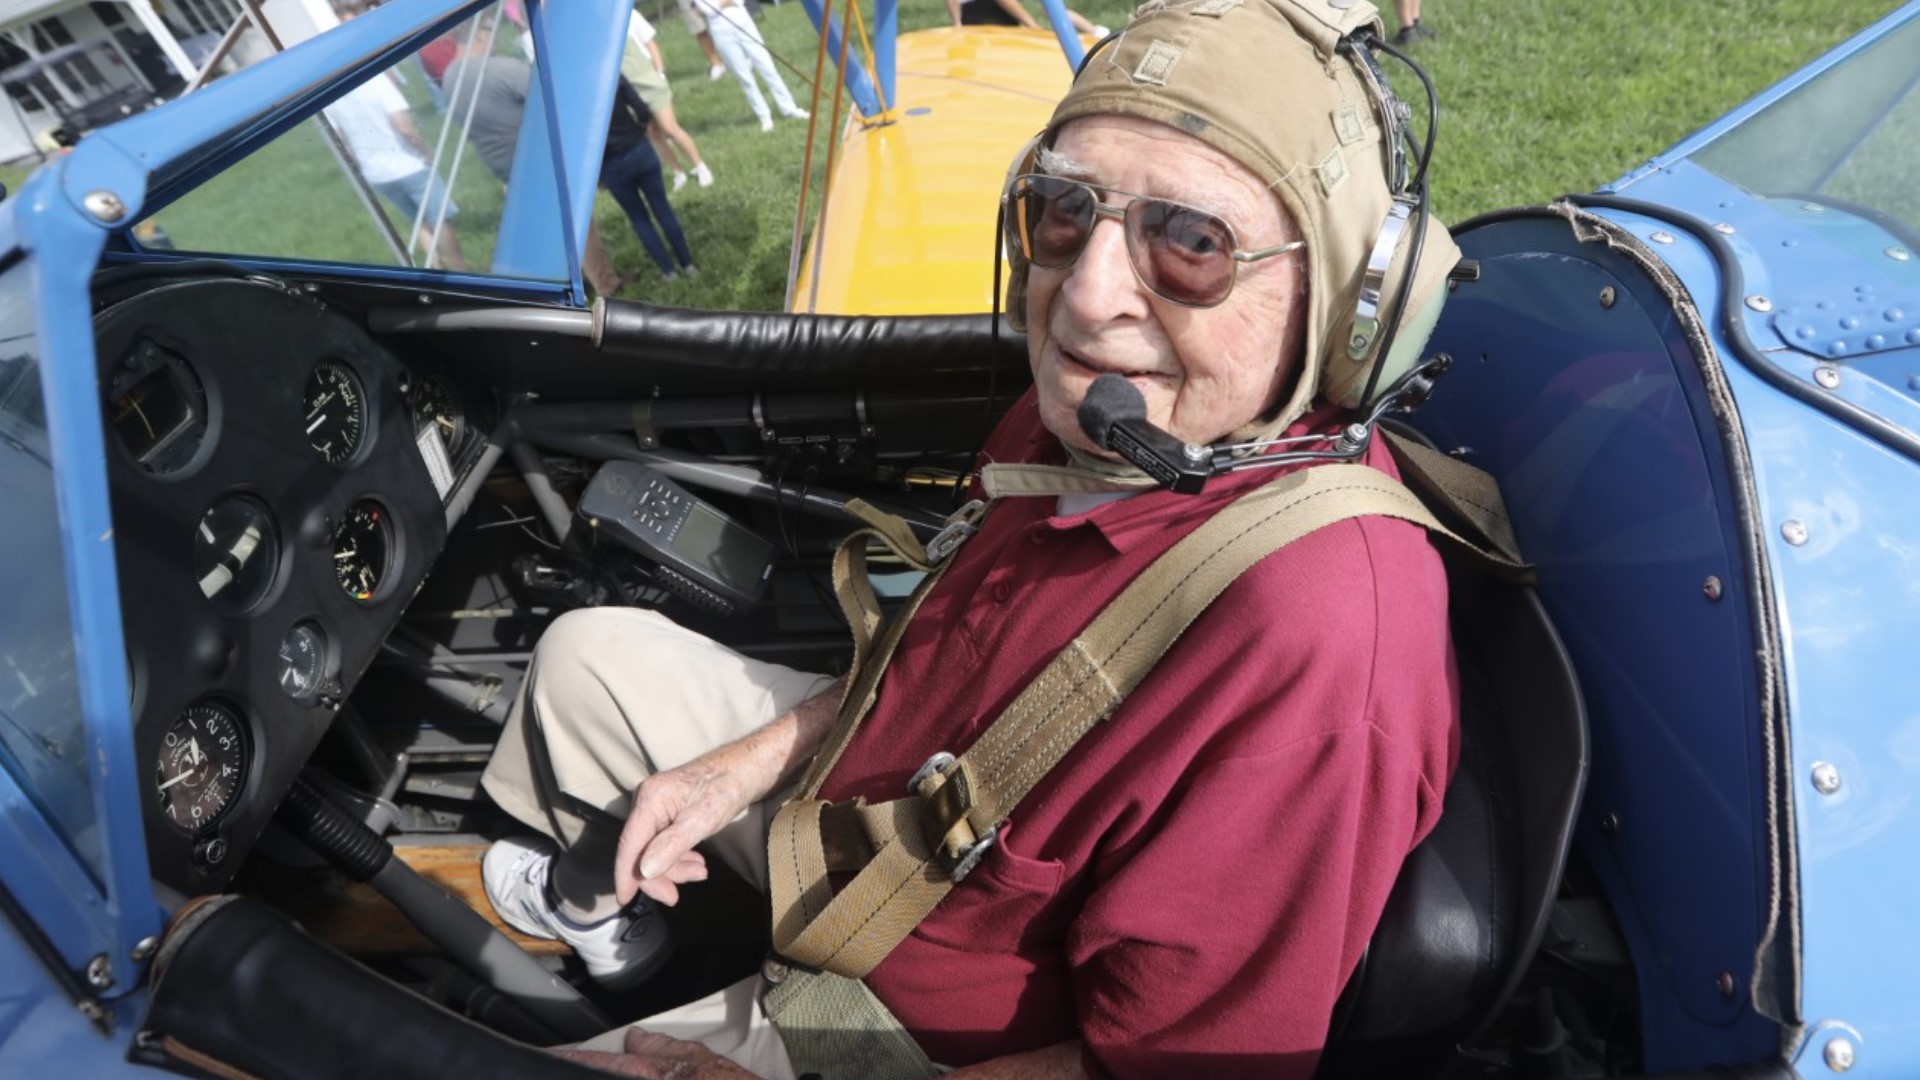 Jim Reynolds celebrated the milestone back in August, when he took to the skies in a plane similar to the one he flew in the 1940s.